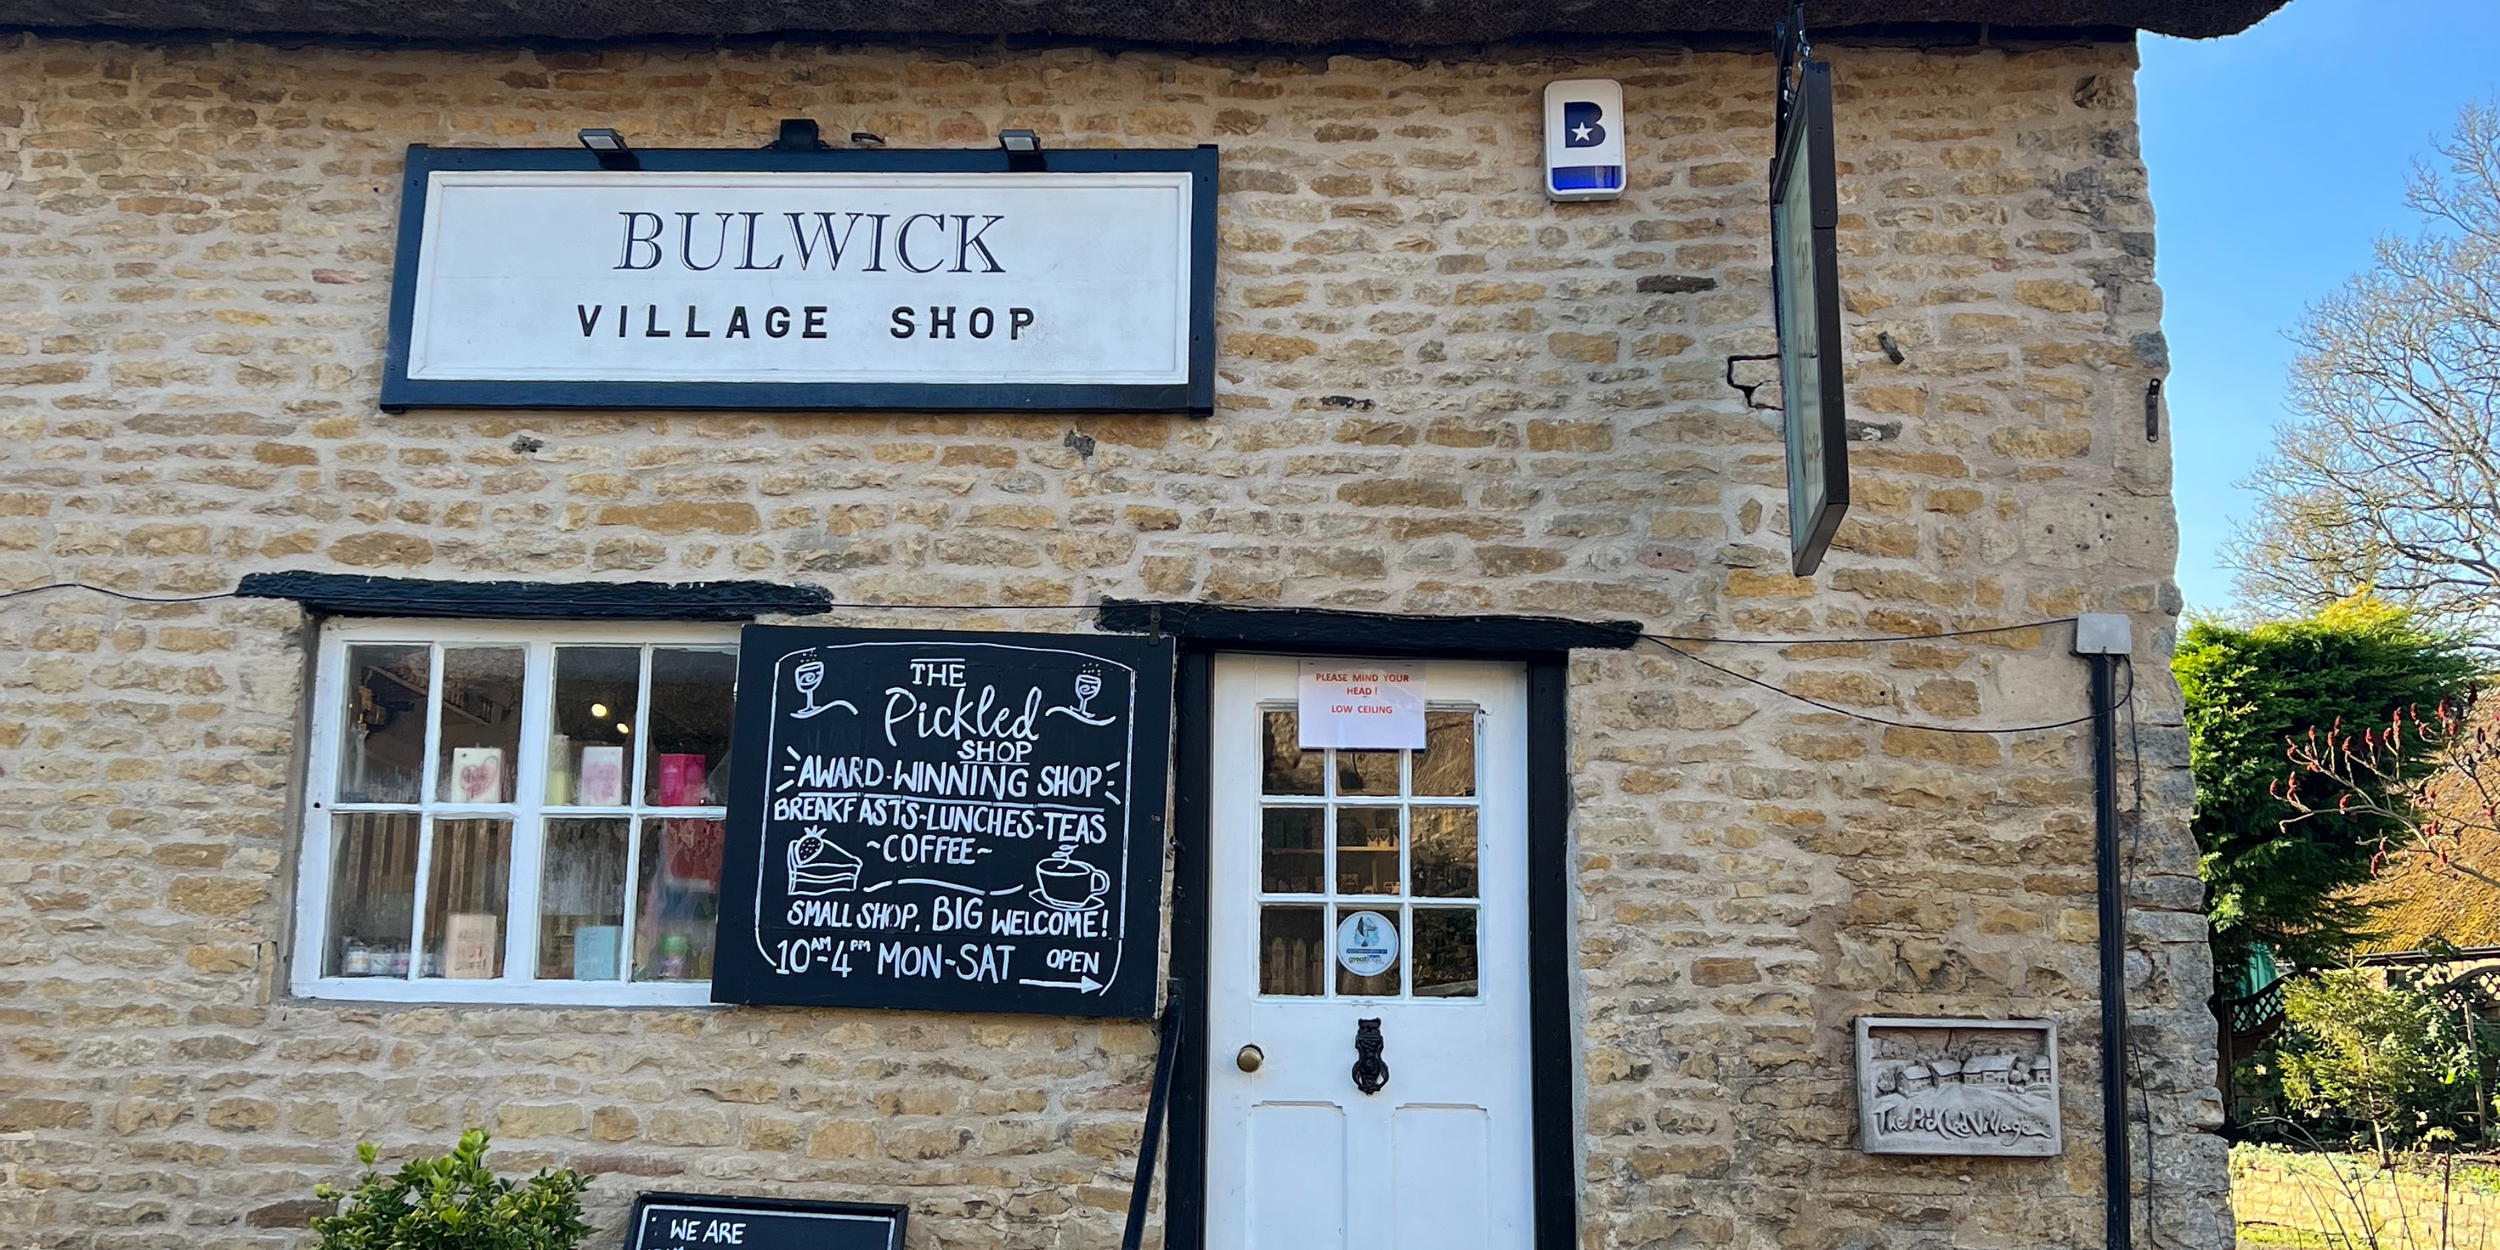 One of the most beautiful village shops you’ll find. The Pickled Shop in Bulwick has a stunning ‘tea terrace’ and sells delicious cakes and local produce. Owner Camille (pictured) has created a slice of heaven in nor (6).png